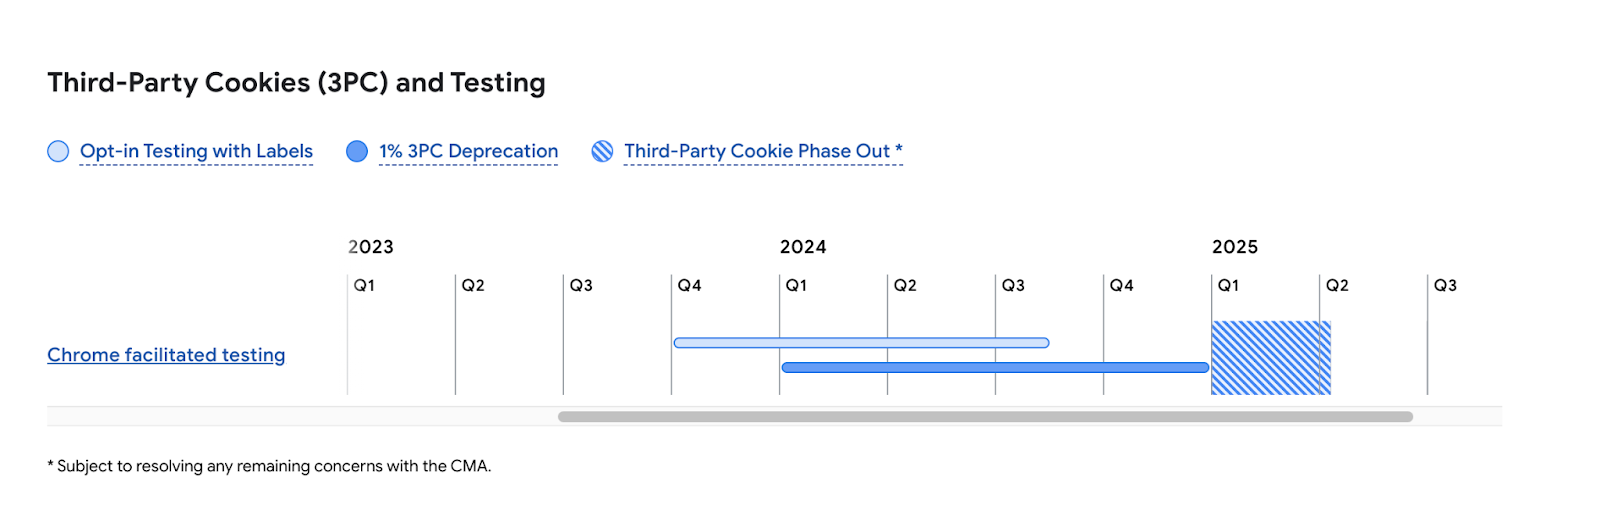 Third Party Cookies and Testing Timeline